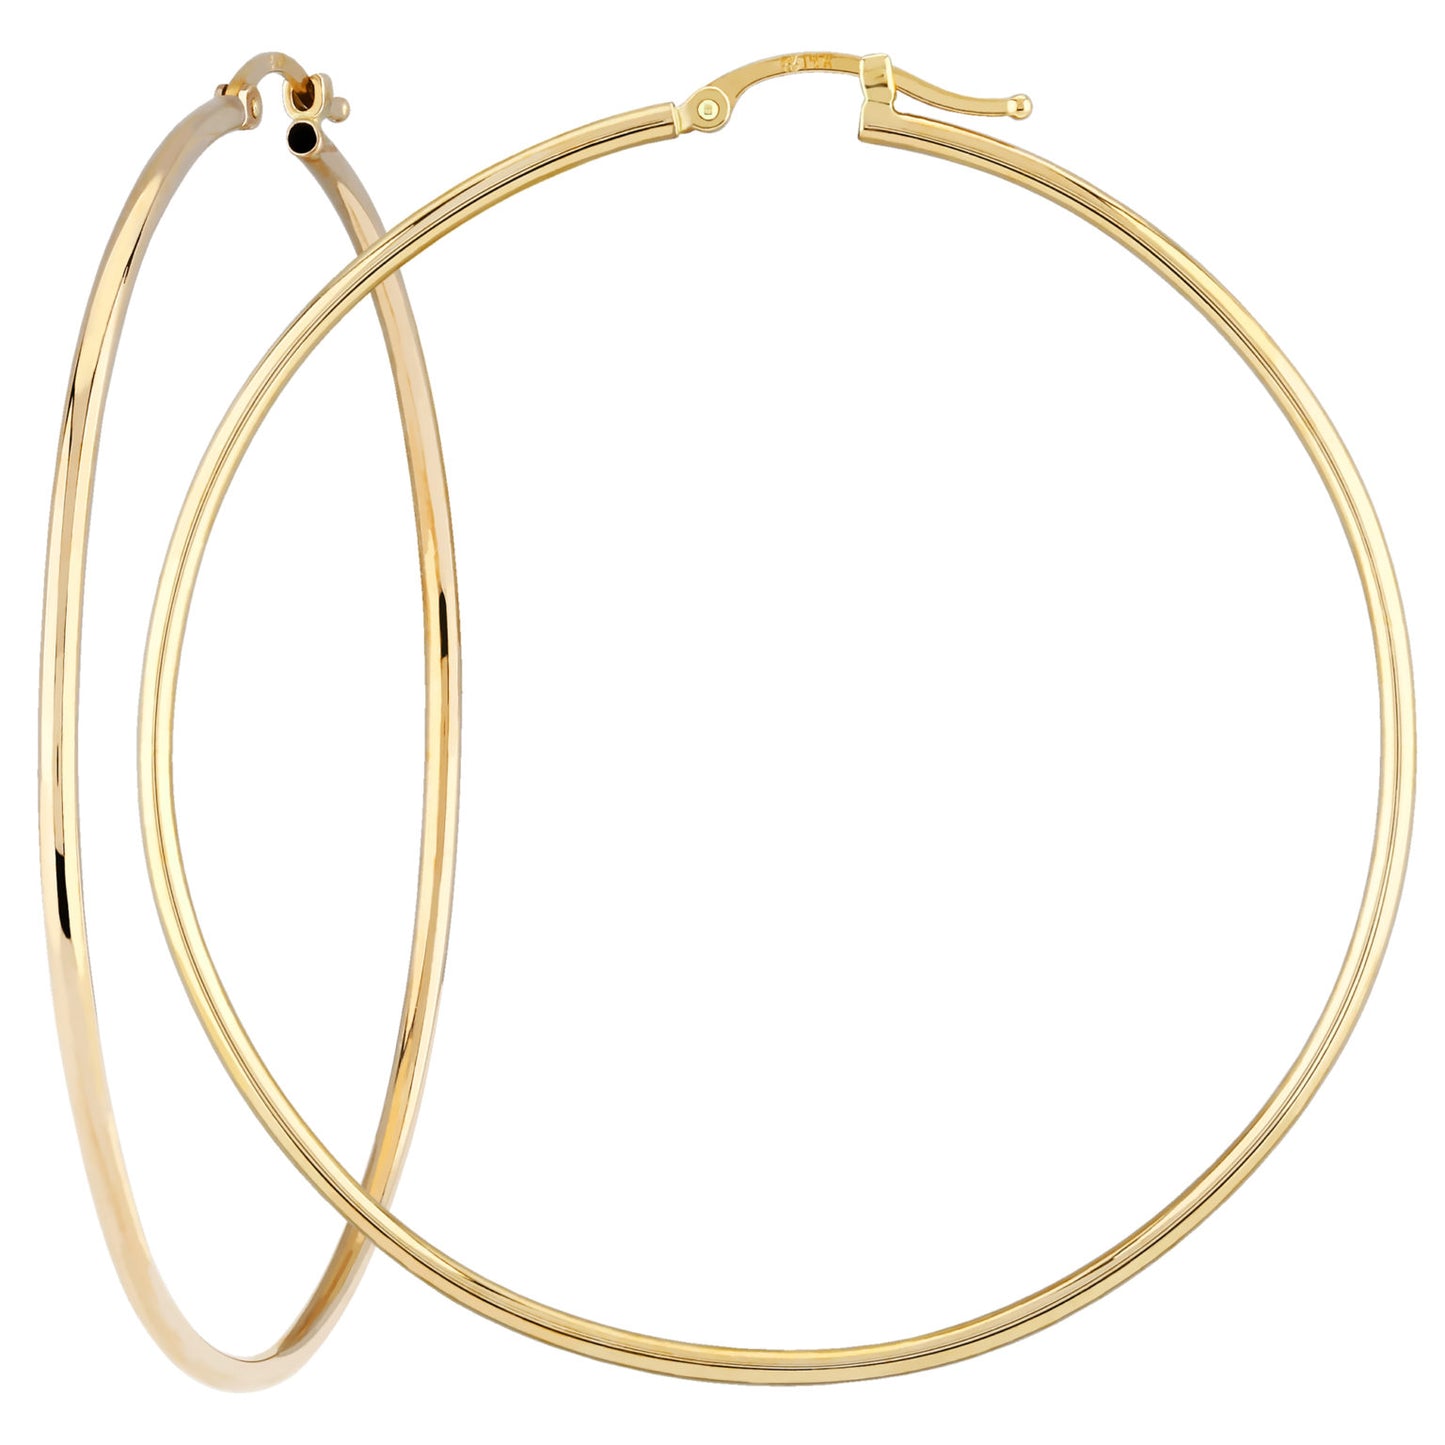 Extra Large Gold Hoops